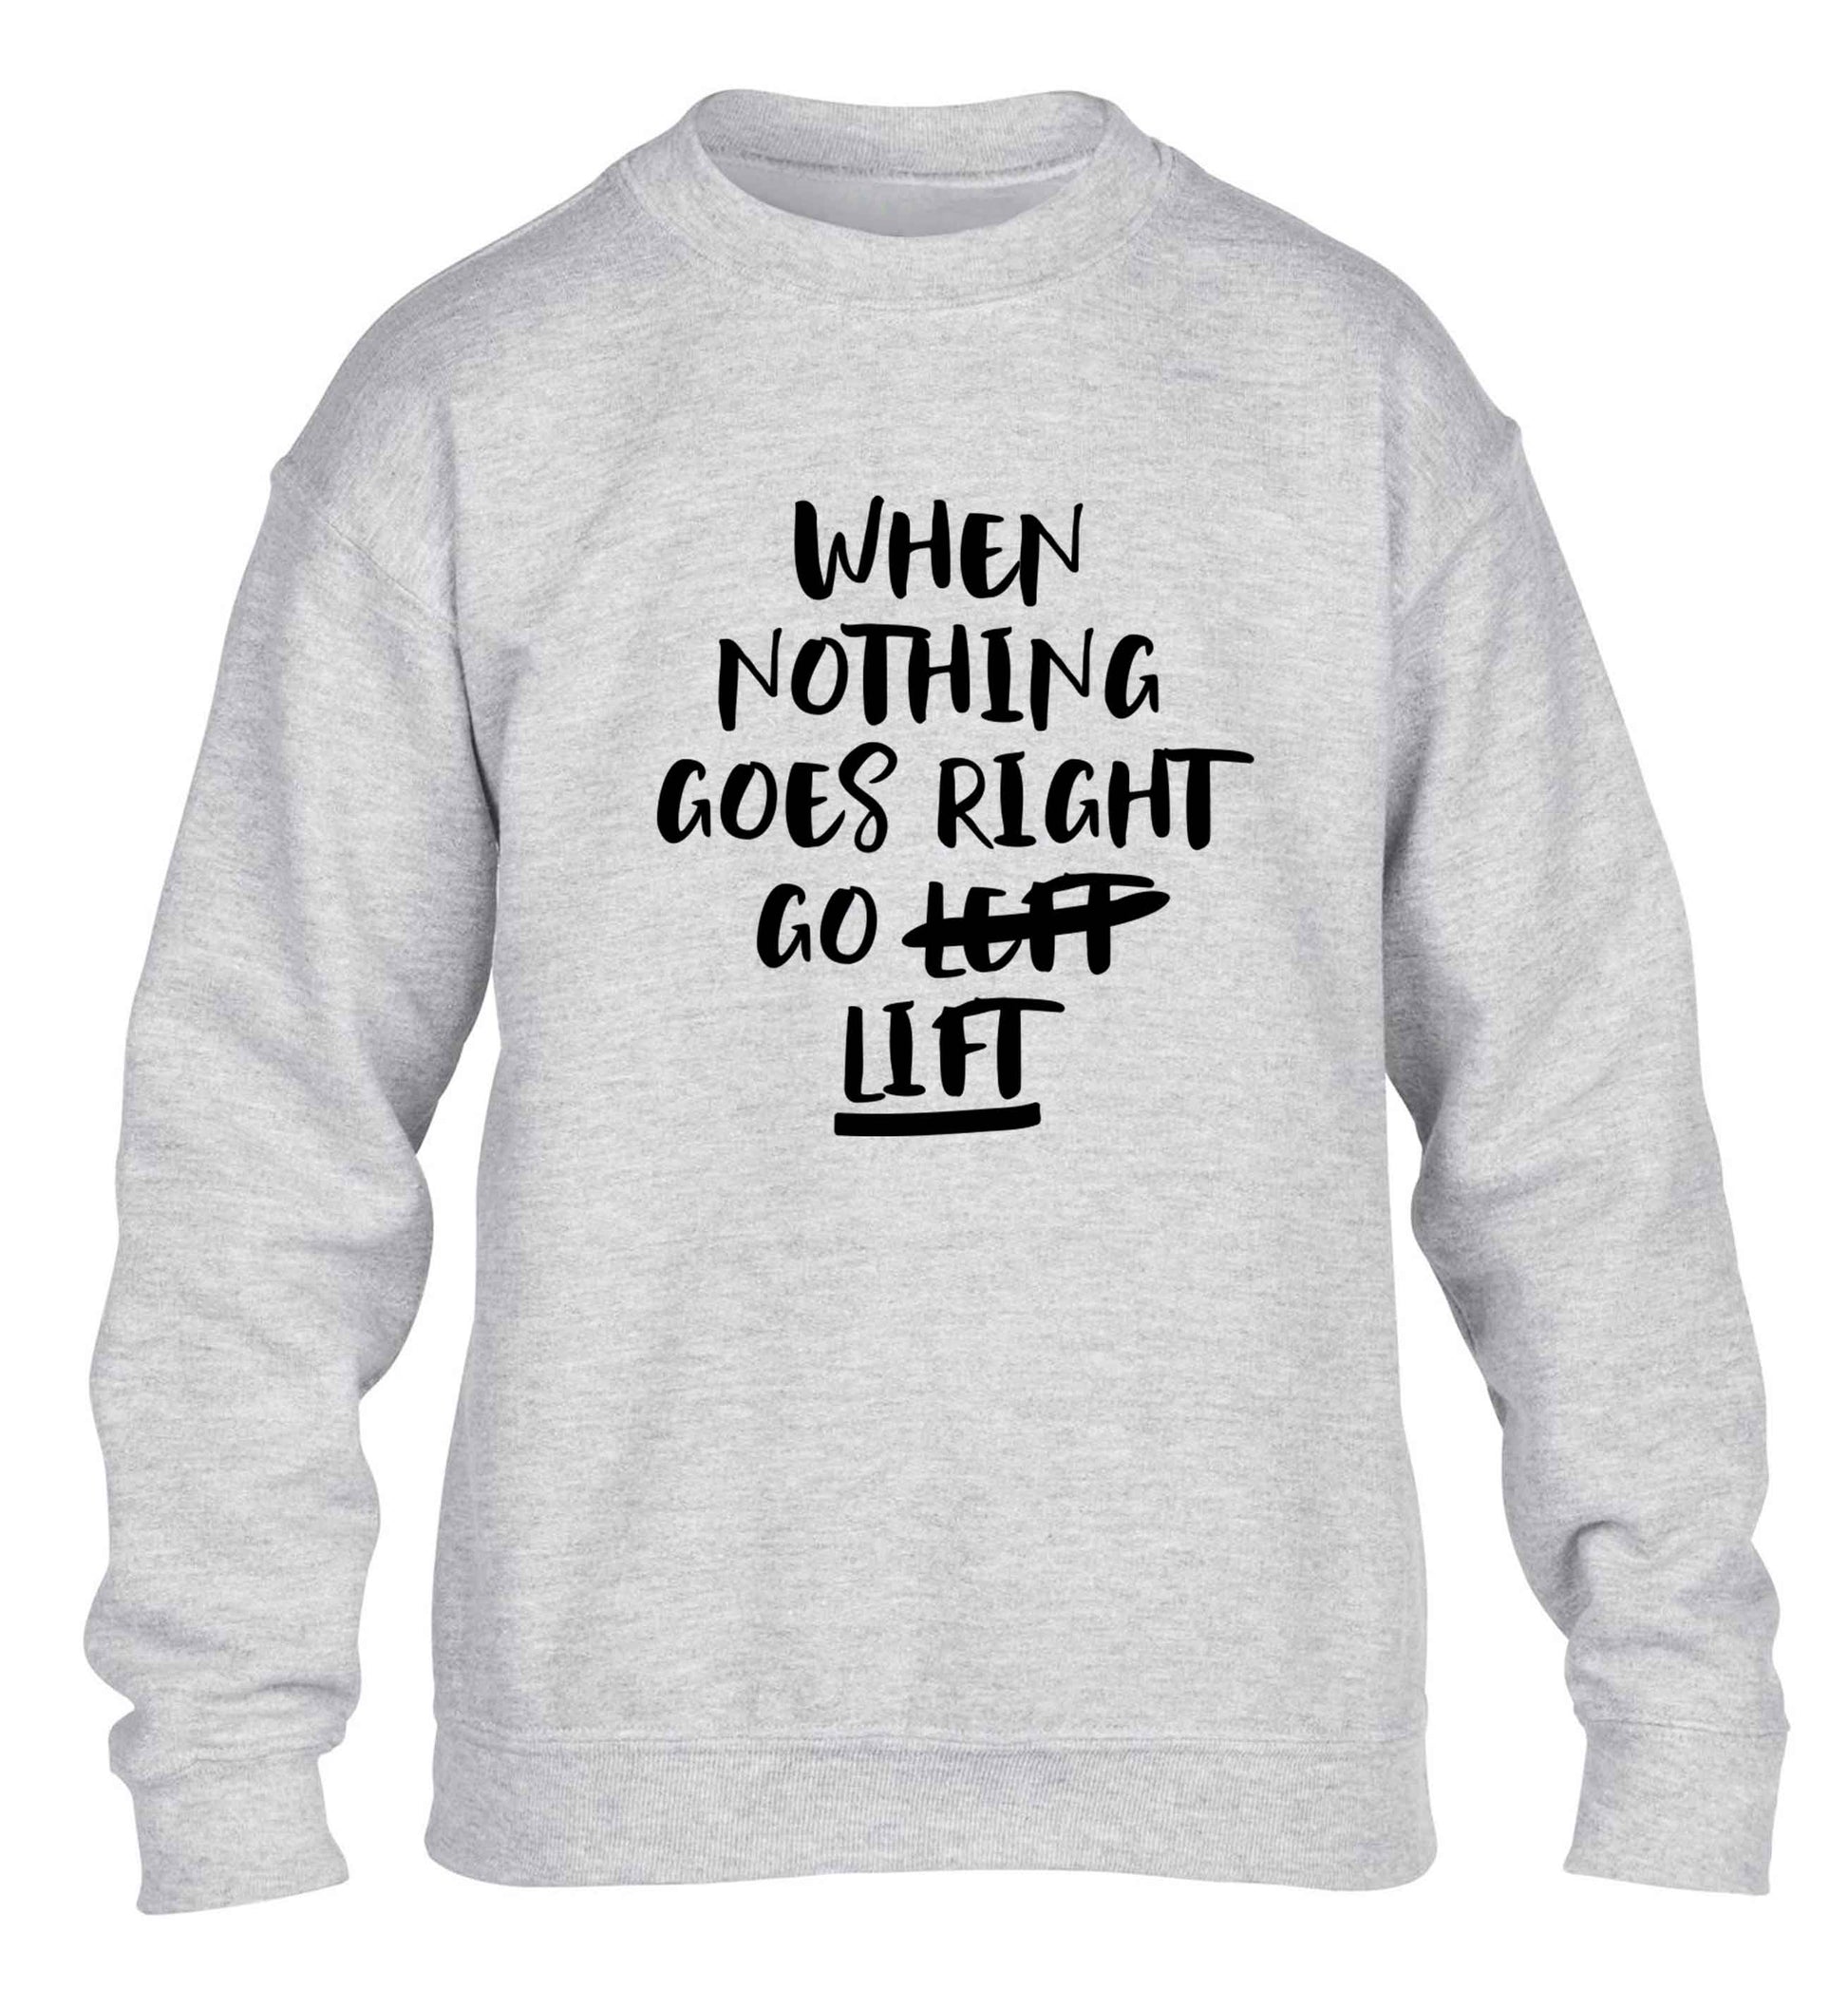 When nothing goes right go lift children's grey sweater 12-13 Years